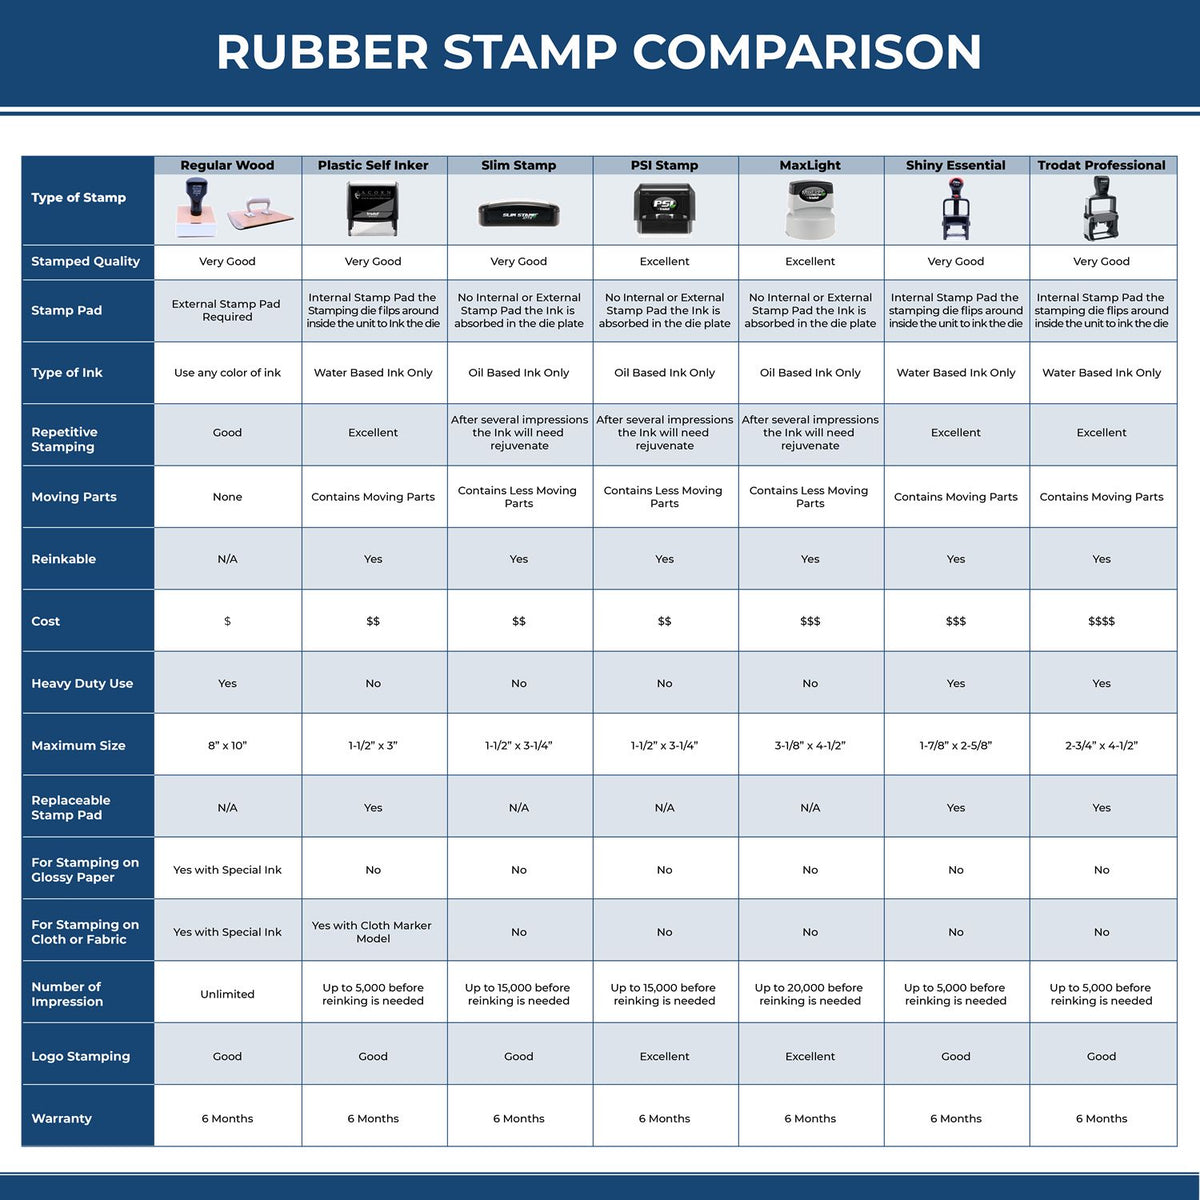 Large Two Line Received Rubber Stamp 4148R Rubber Stamp Comparison